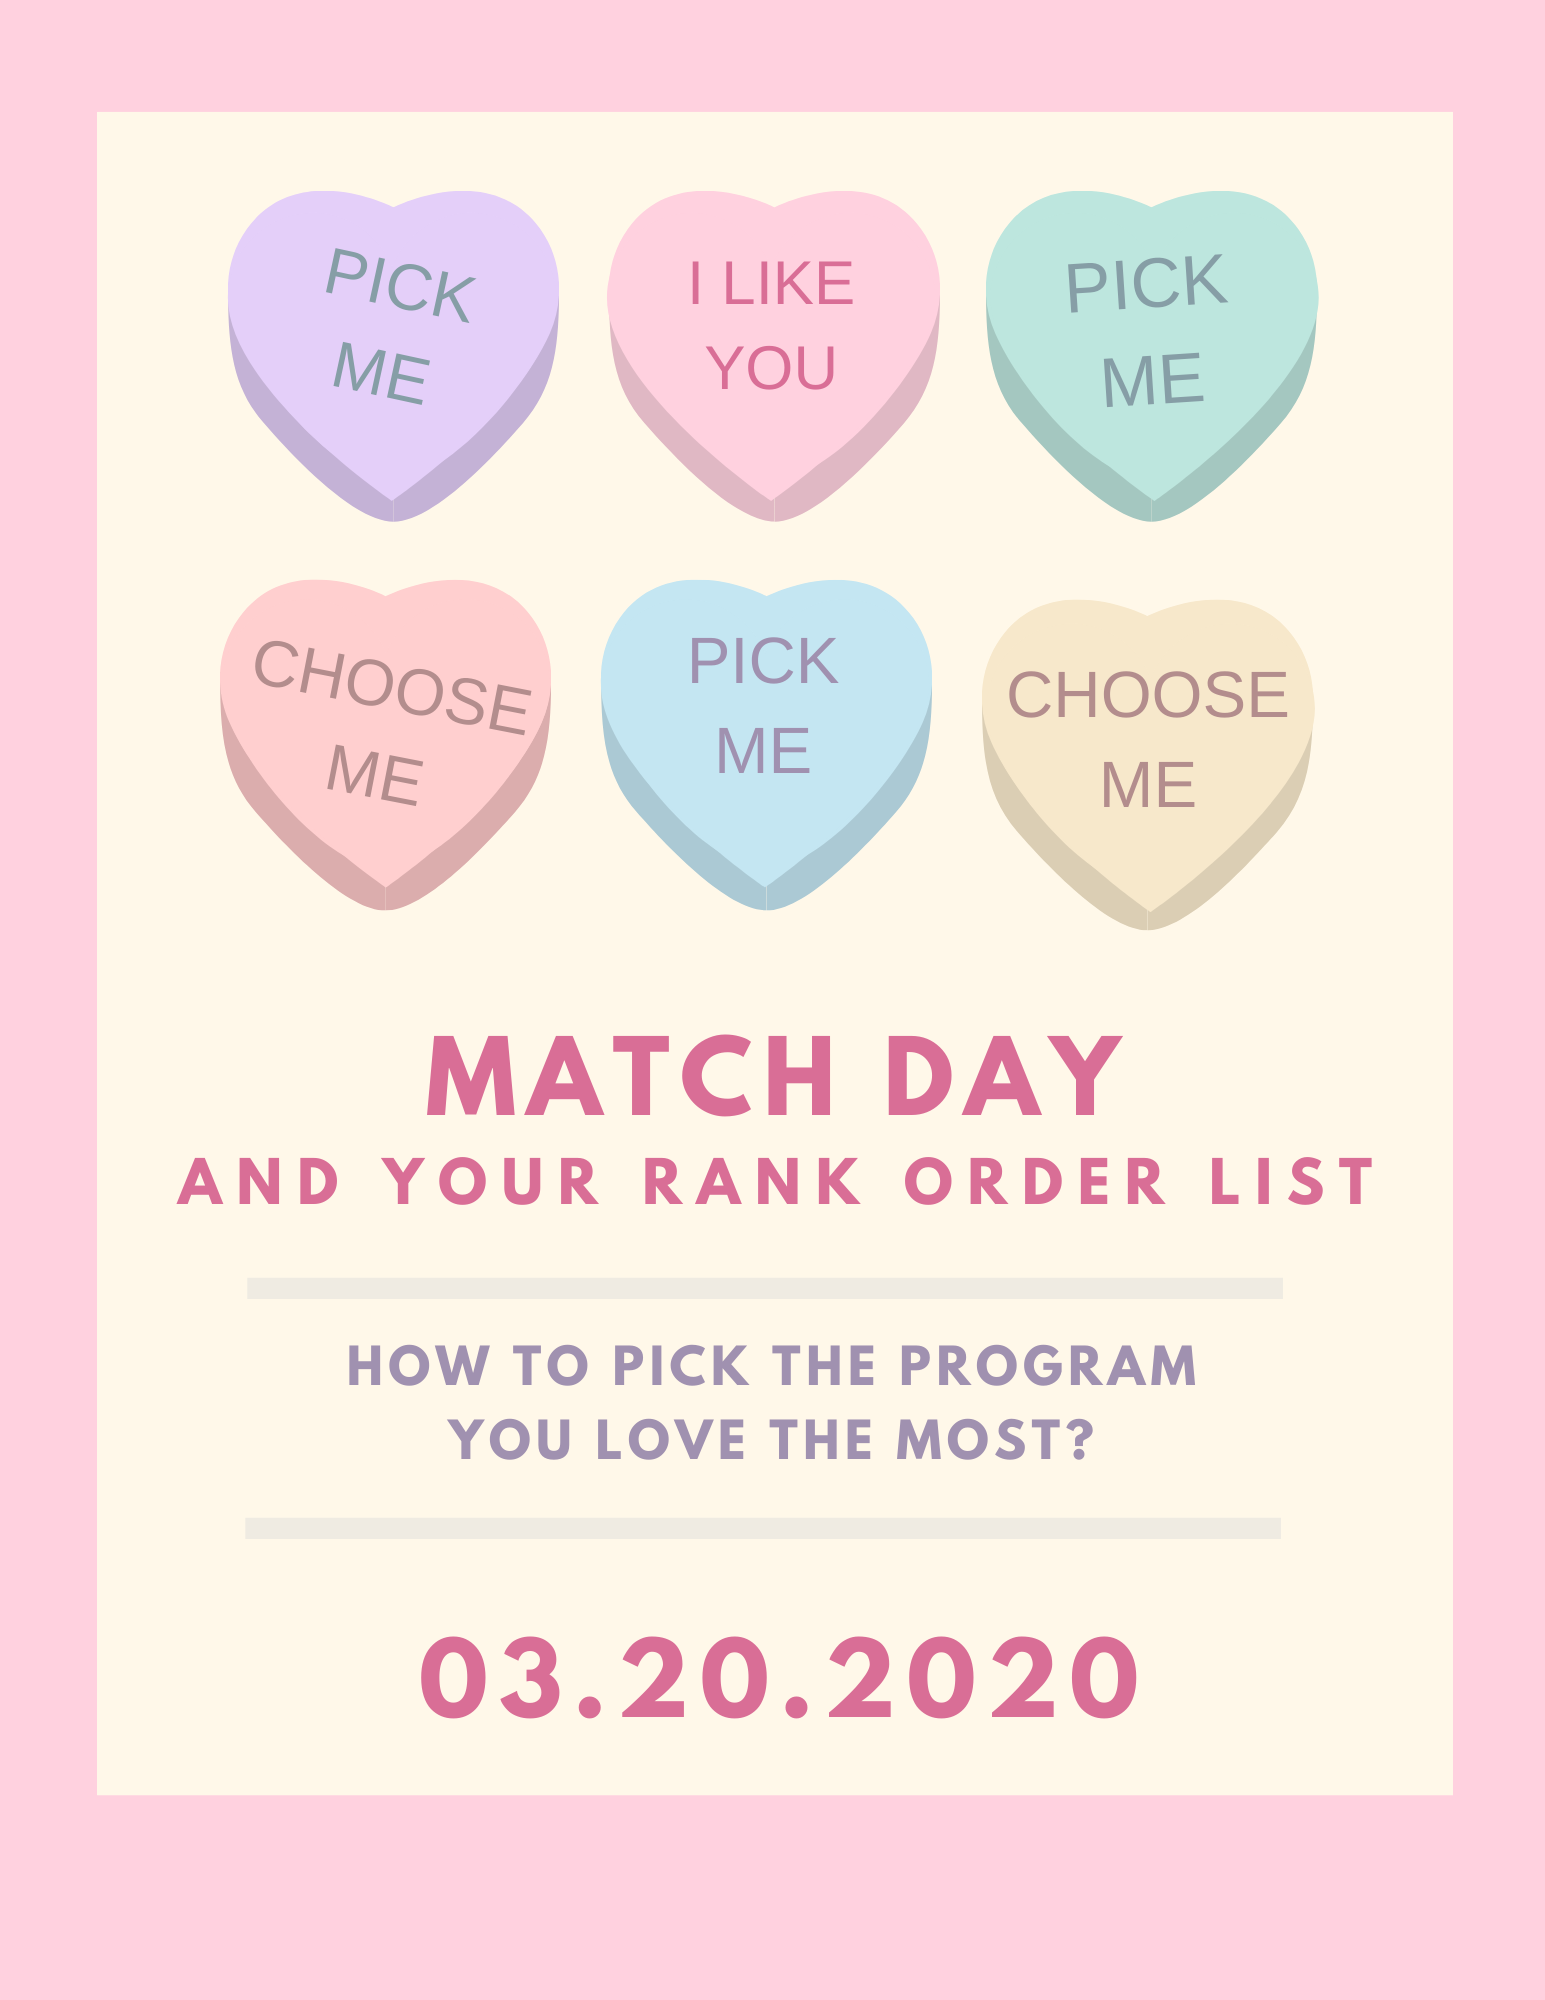 Images of Valentine's candies with "pick me" and "choose me" with text Match Day and Your Rank order List